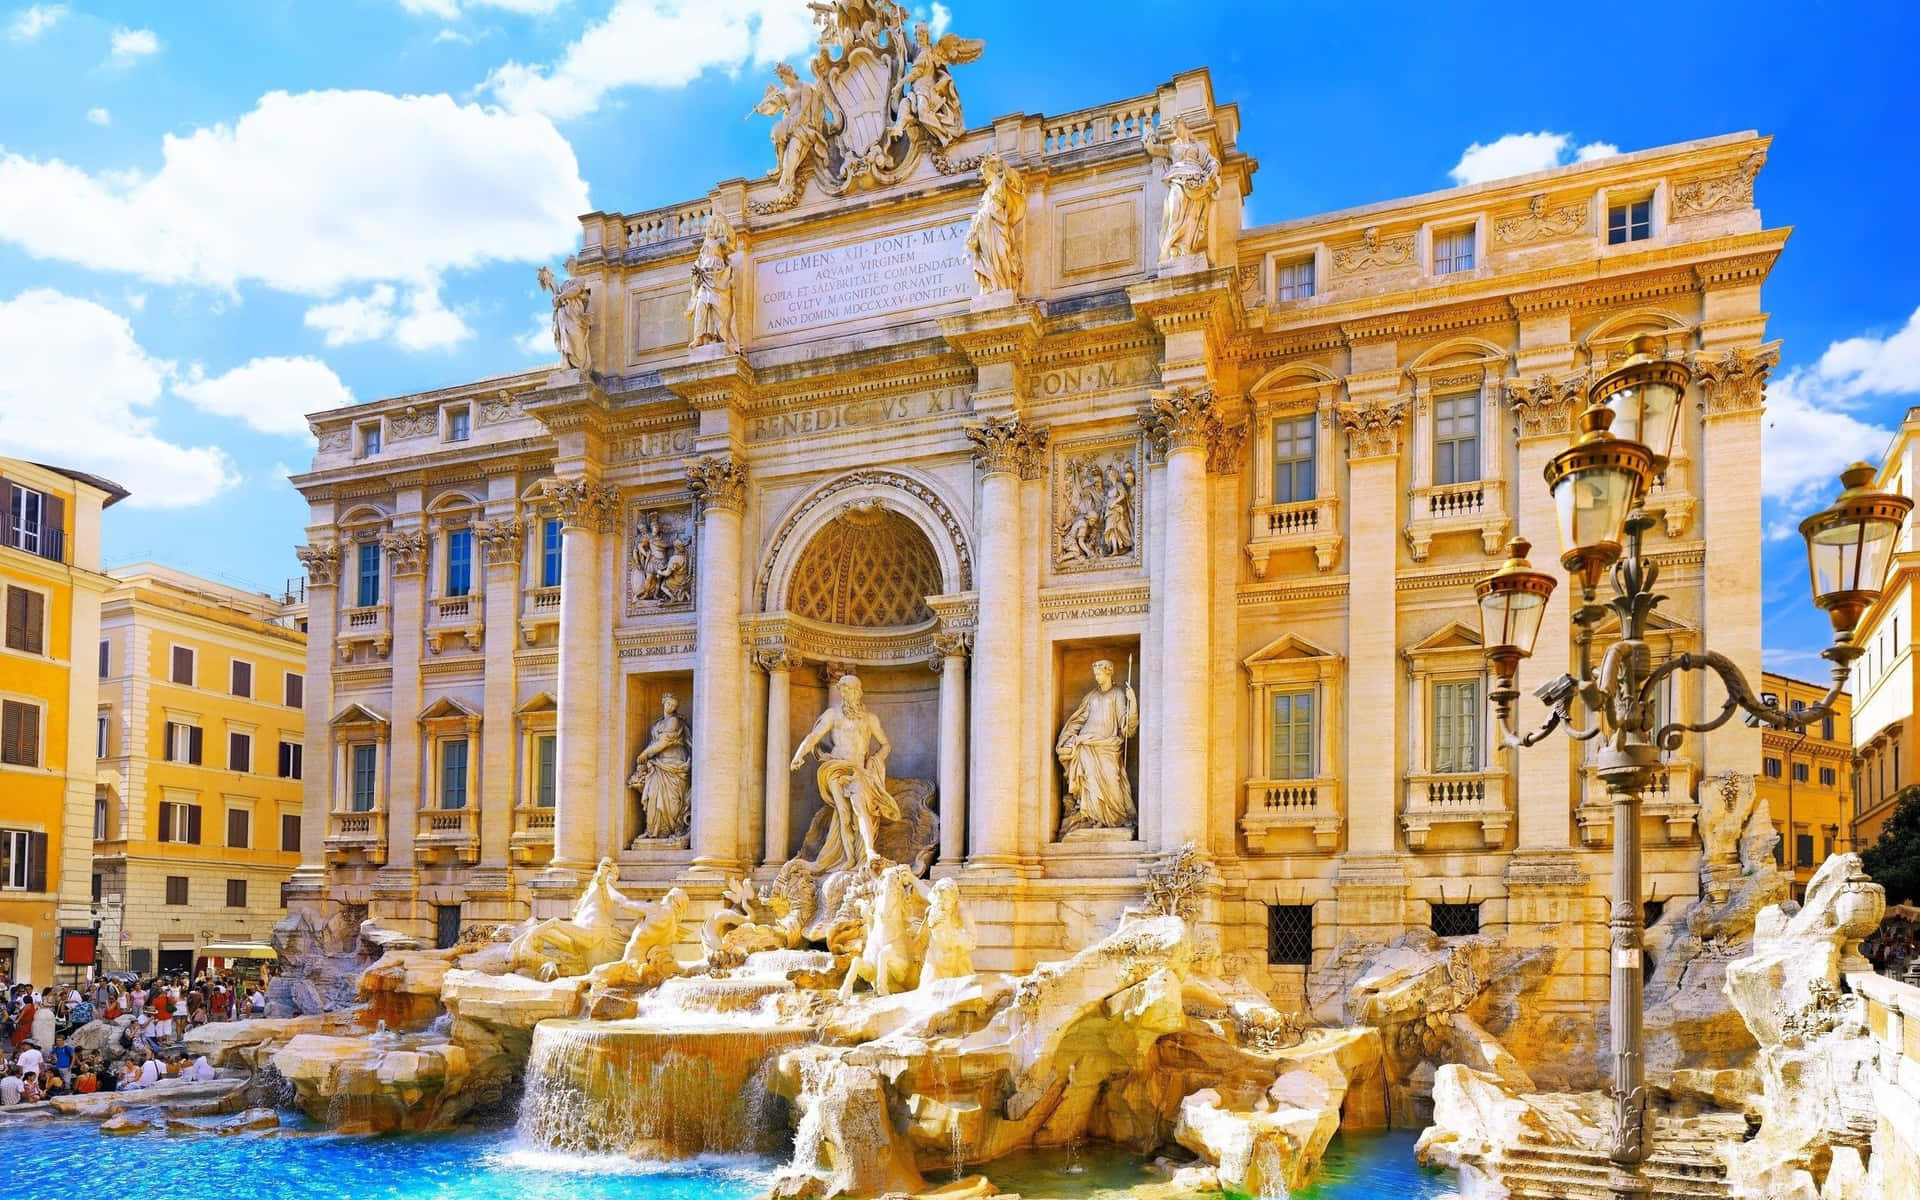 Discover the beauty of the eternal city of Rome